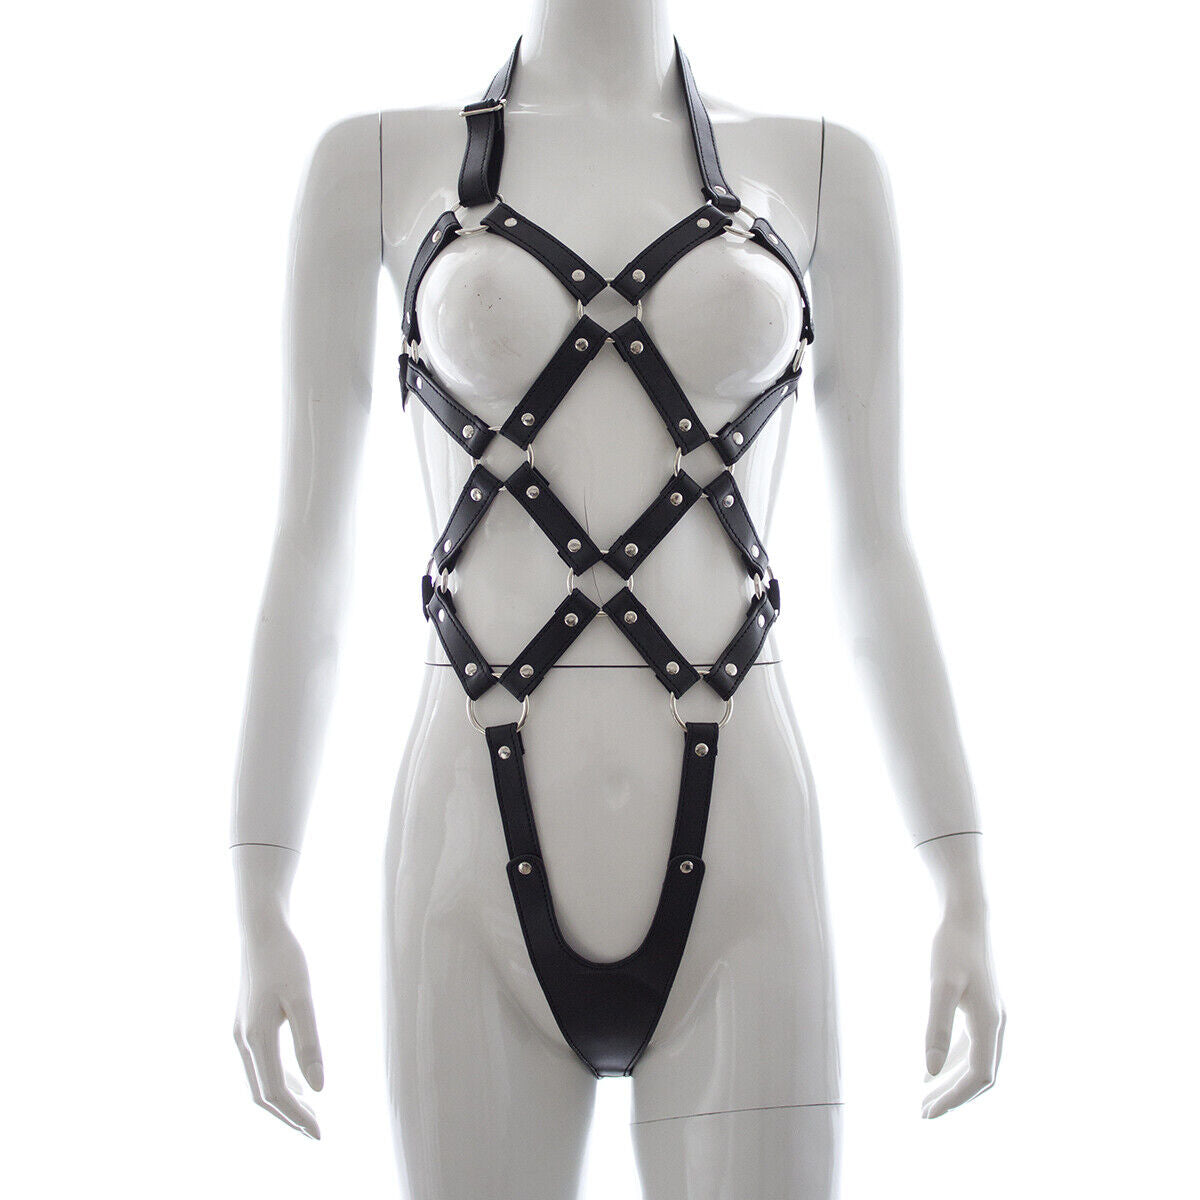 Slip On Body Harness With Elastic Straps